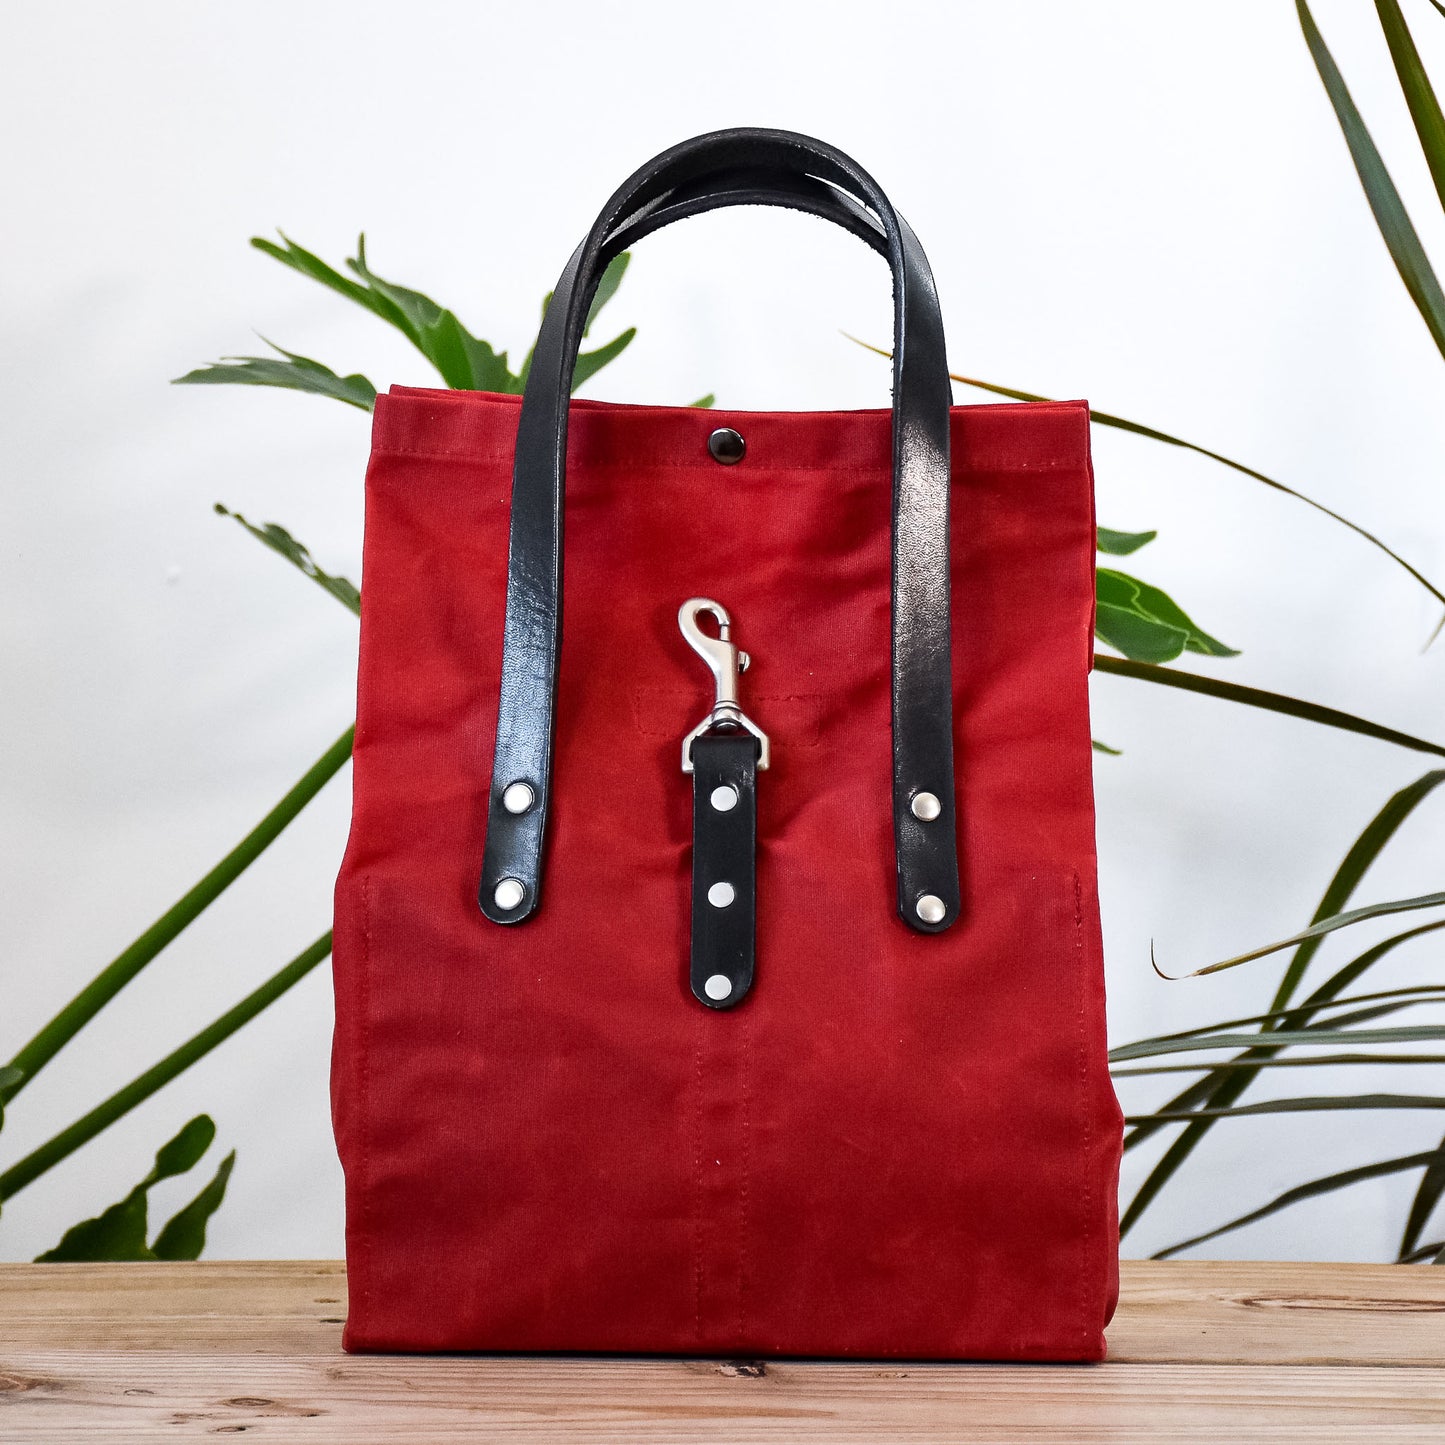 Rich Red Bag No. 2 - On the Go Bag